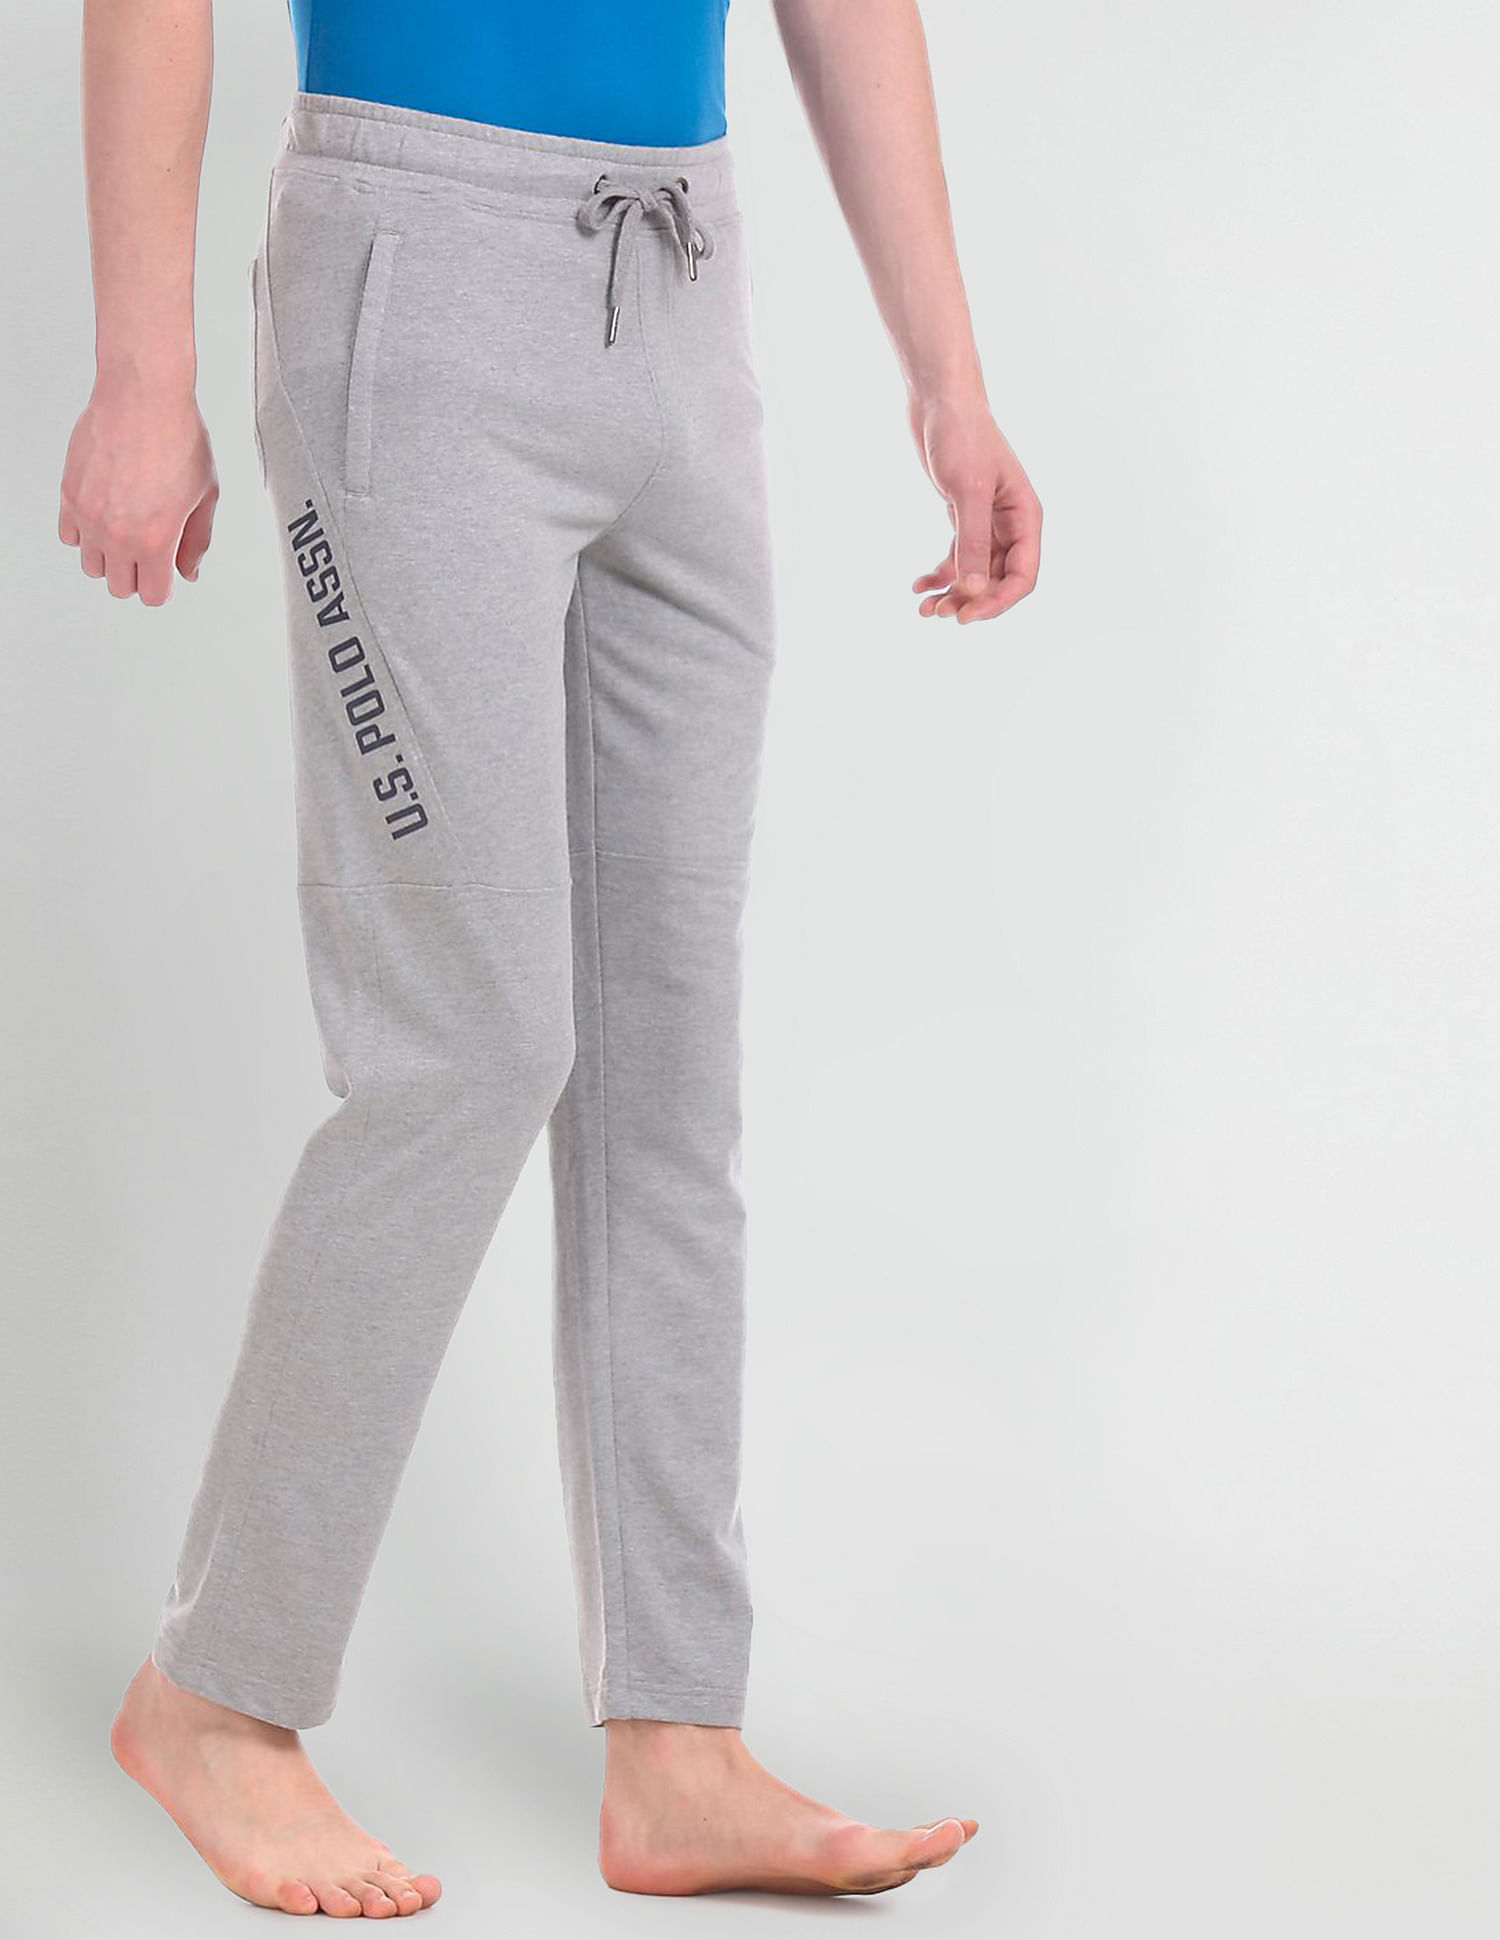 US POLO ASSN Logo Print Lounge Pants  Lifestyle Stores  Sector 4C   Ghaziabad